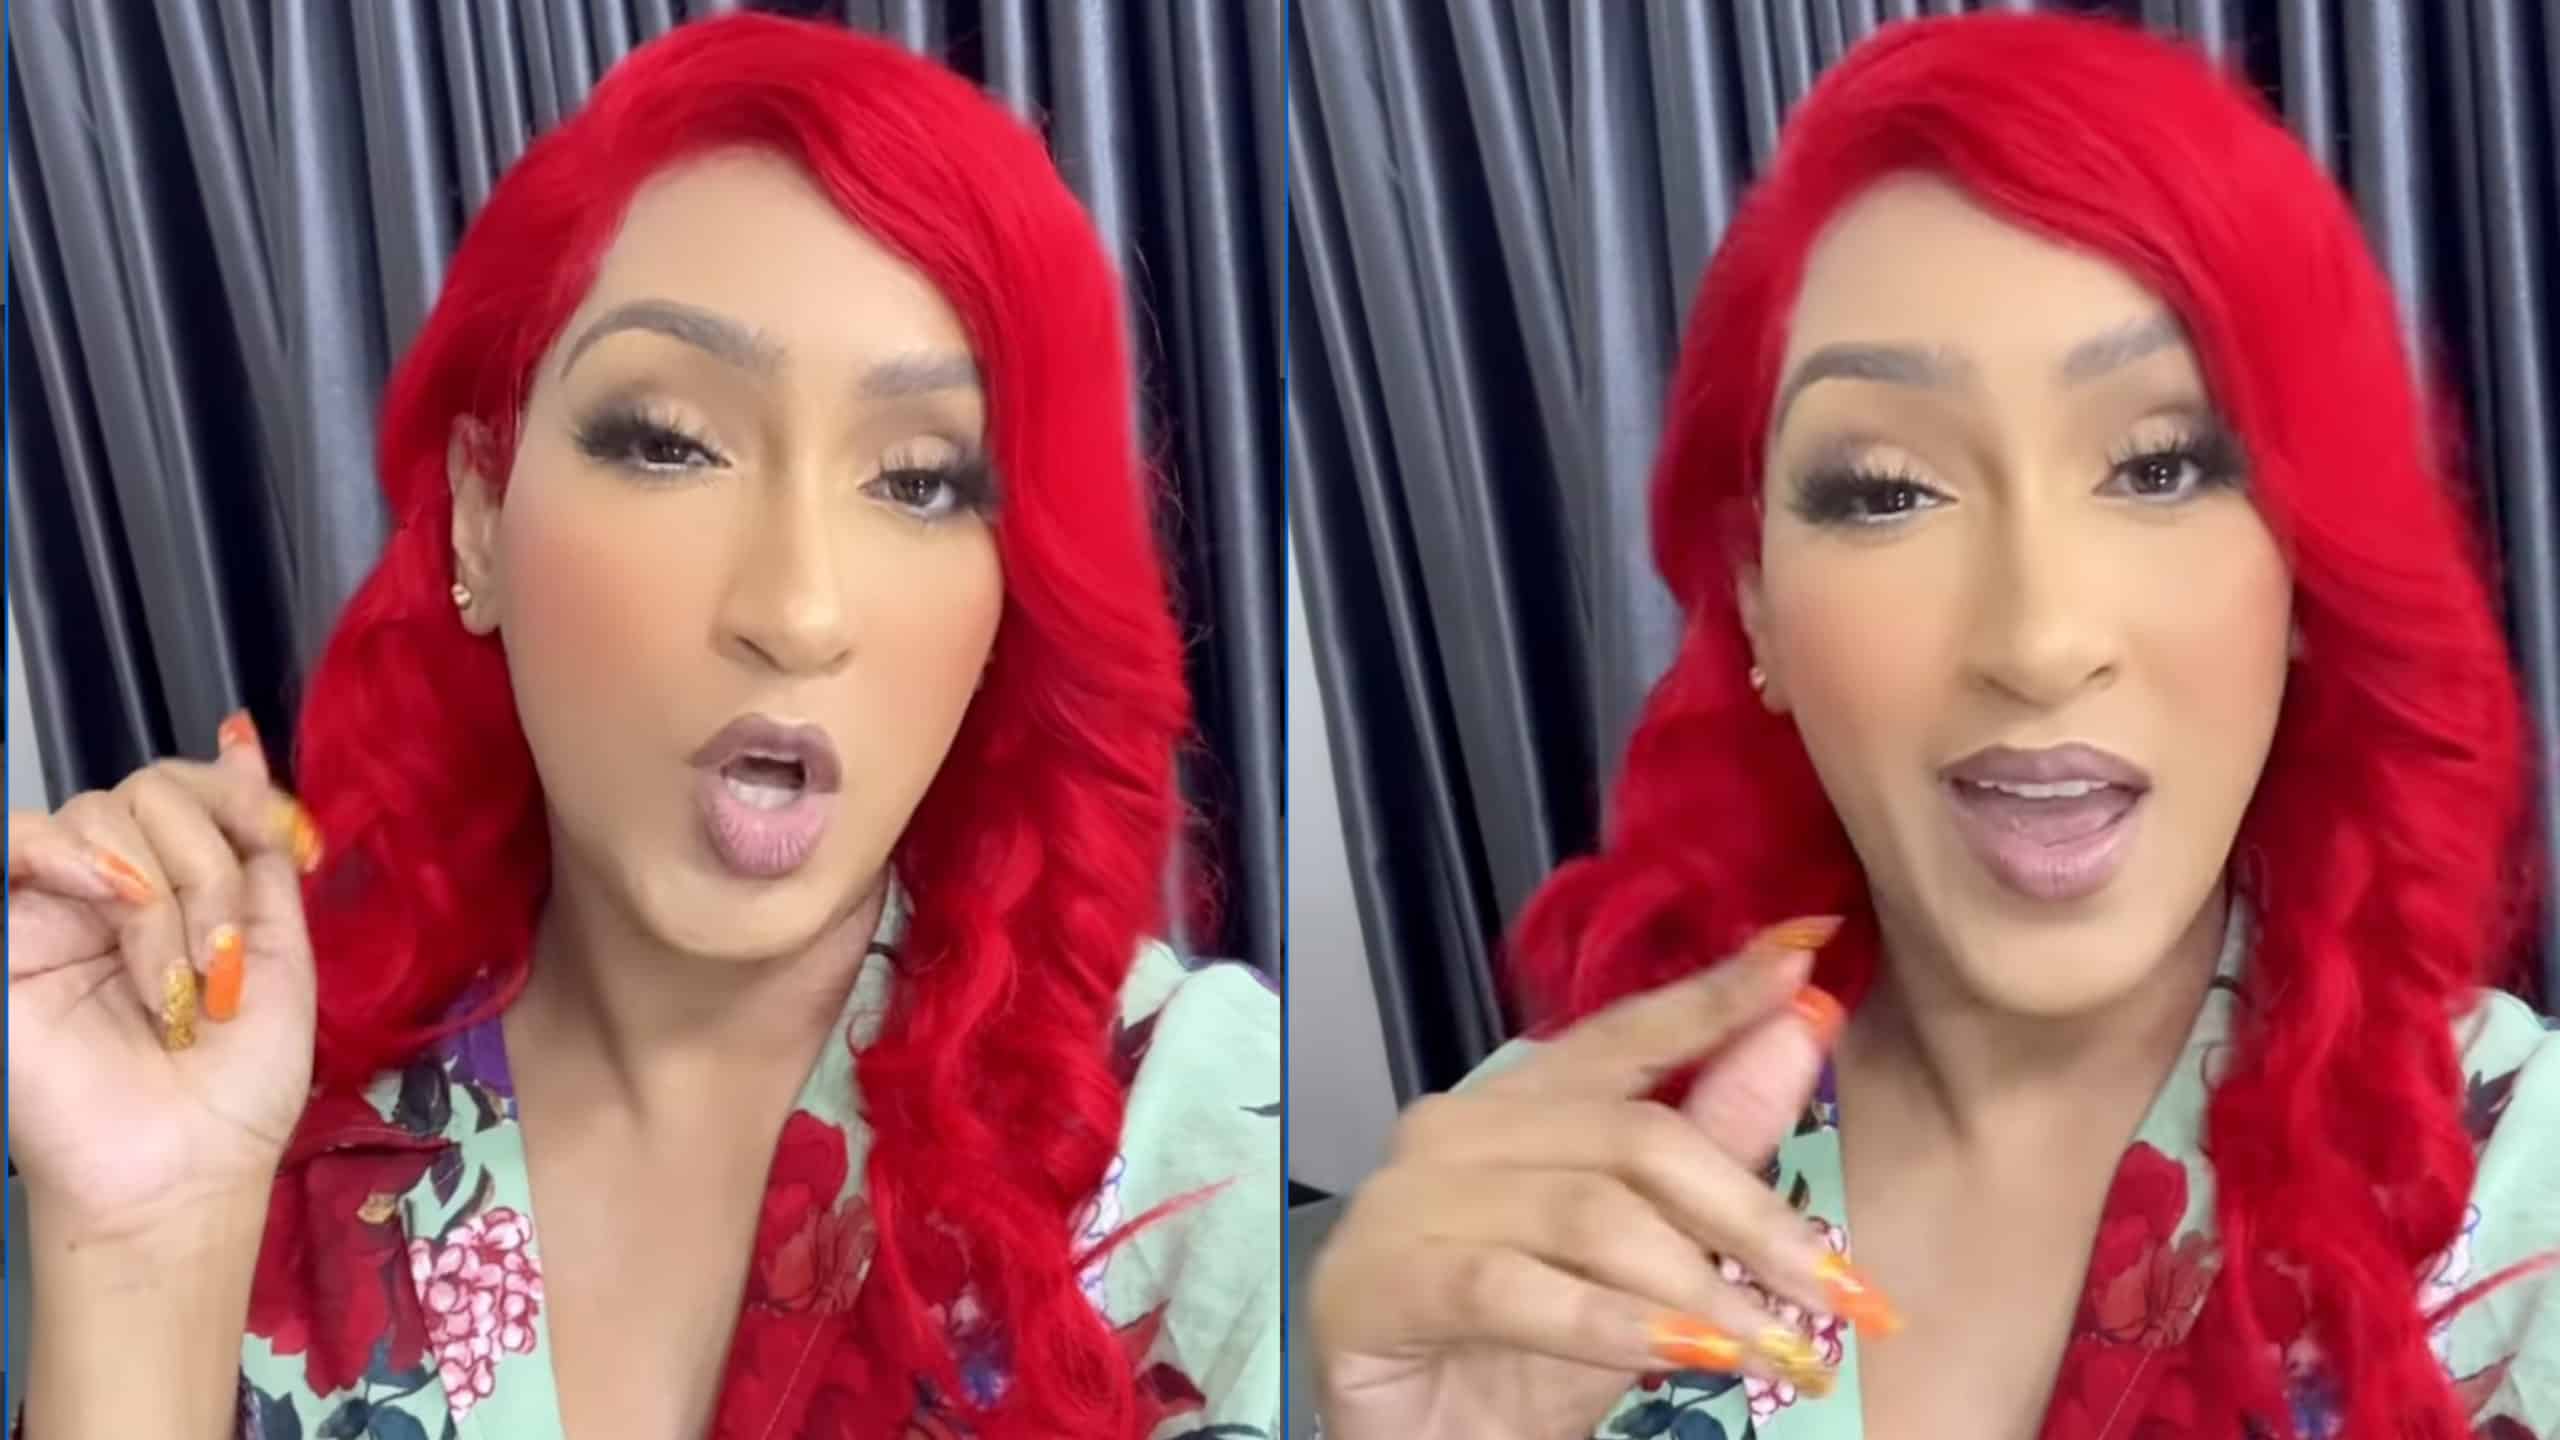 Using saliva as lubricant is risky for women - Juliet Ibrahim explains best  practice